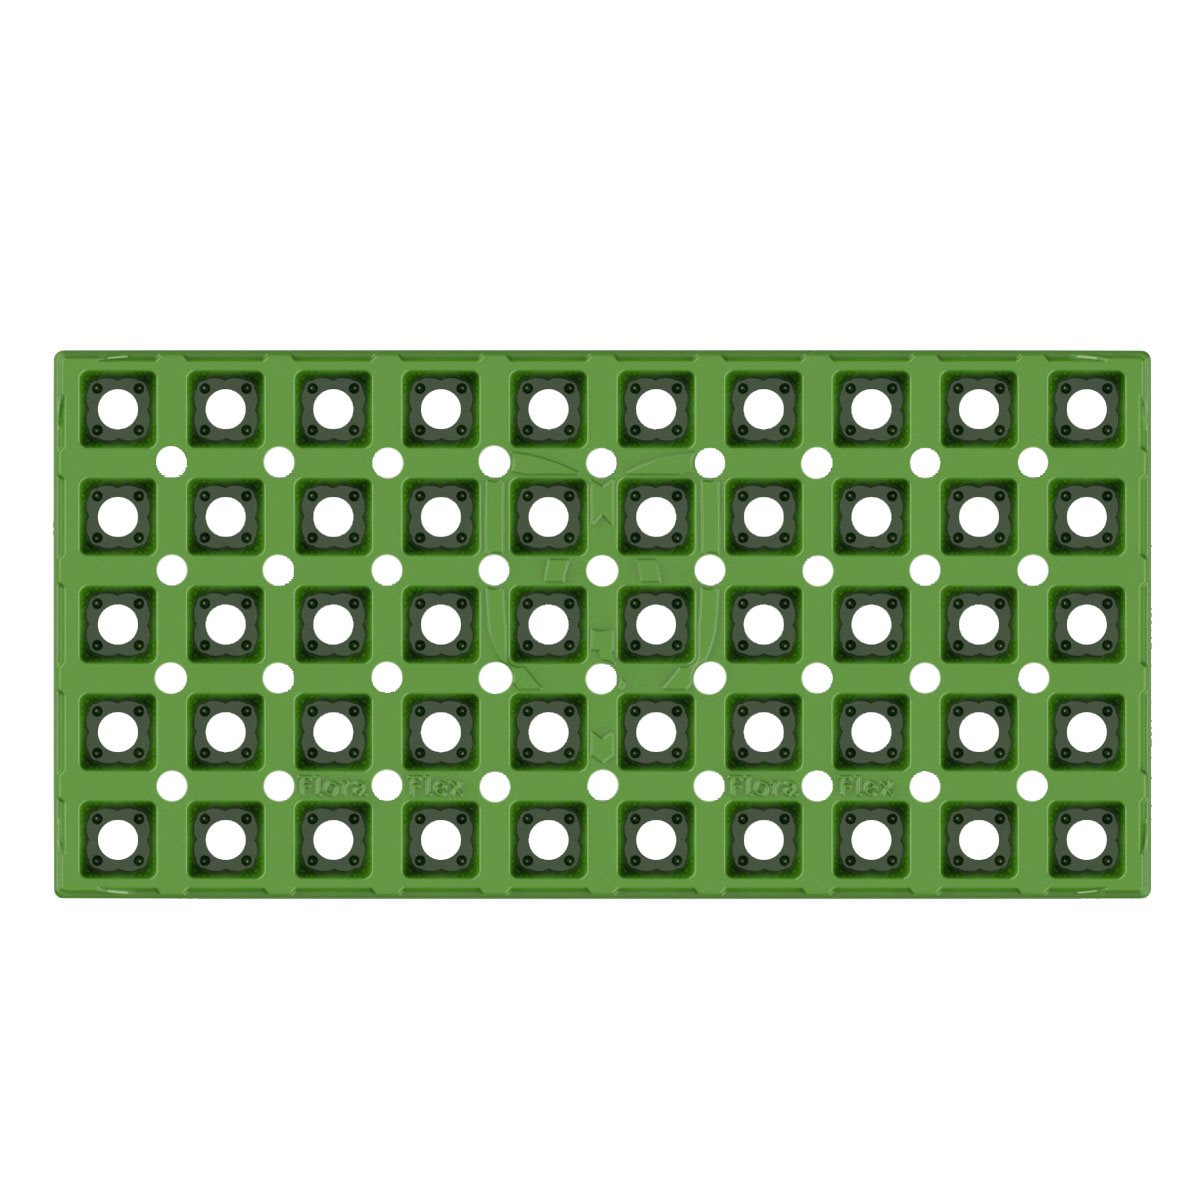 Product Secondary Image:FloraFlex Incubator 50 Cell Insert Tray, pack of 10